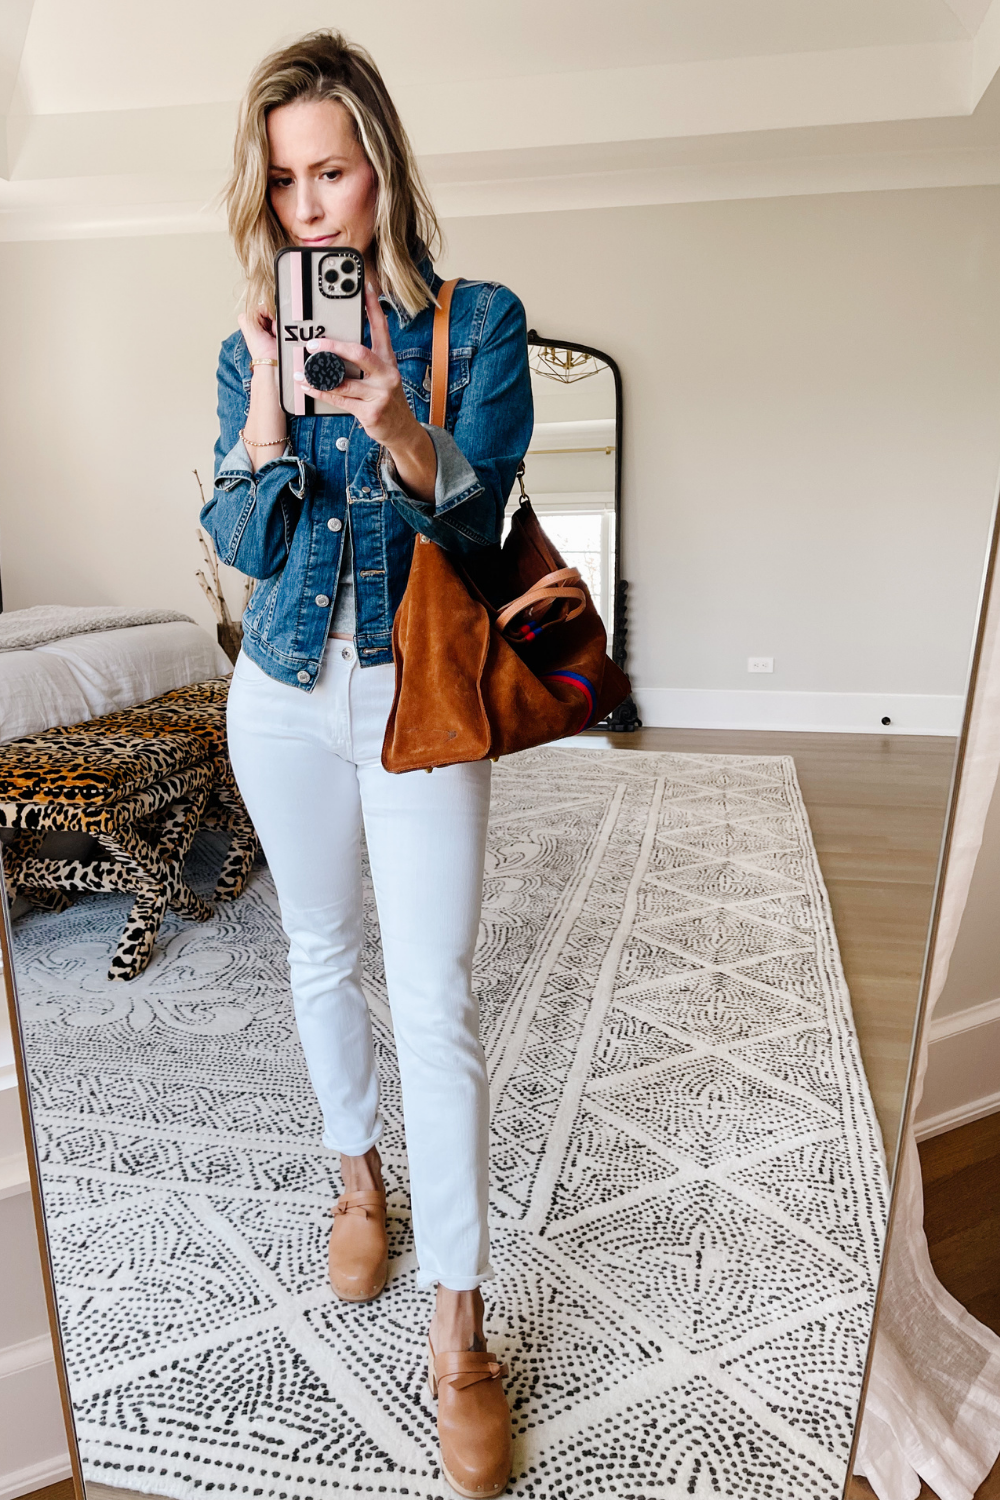 Suzanne wearing white denim jeans, a denim jacket, clogs, and carrying a tote